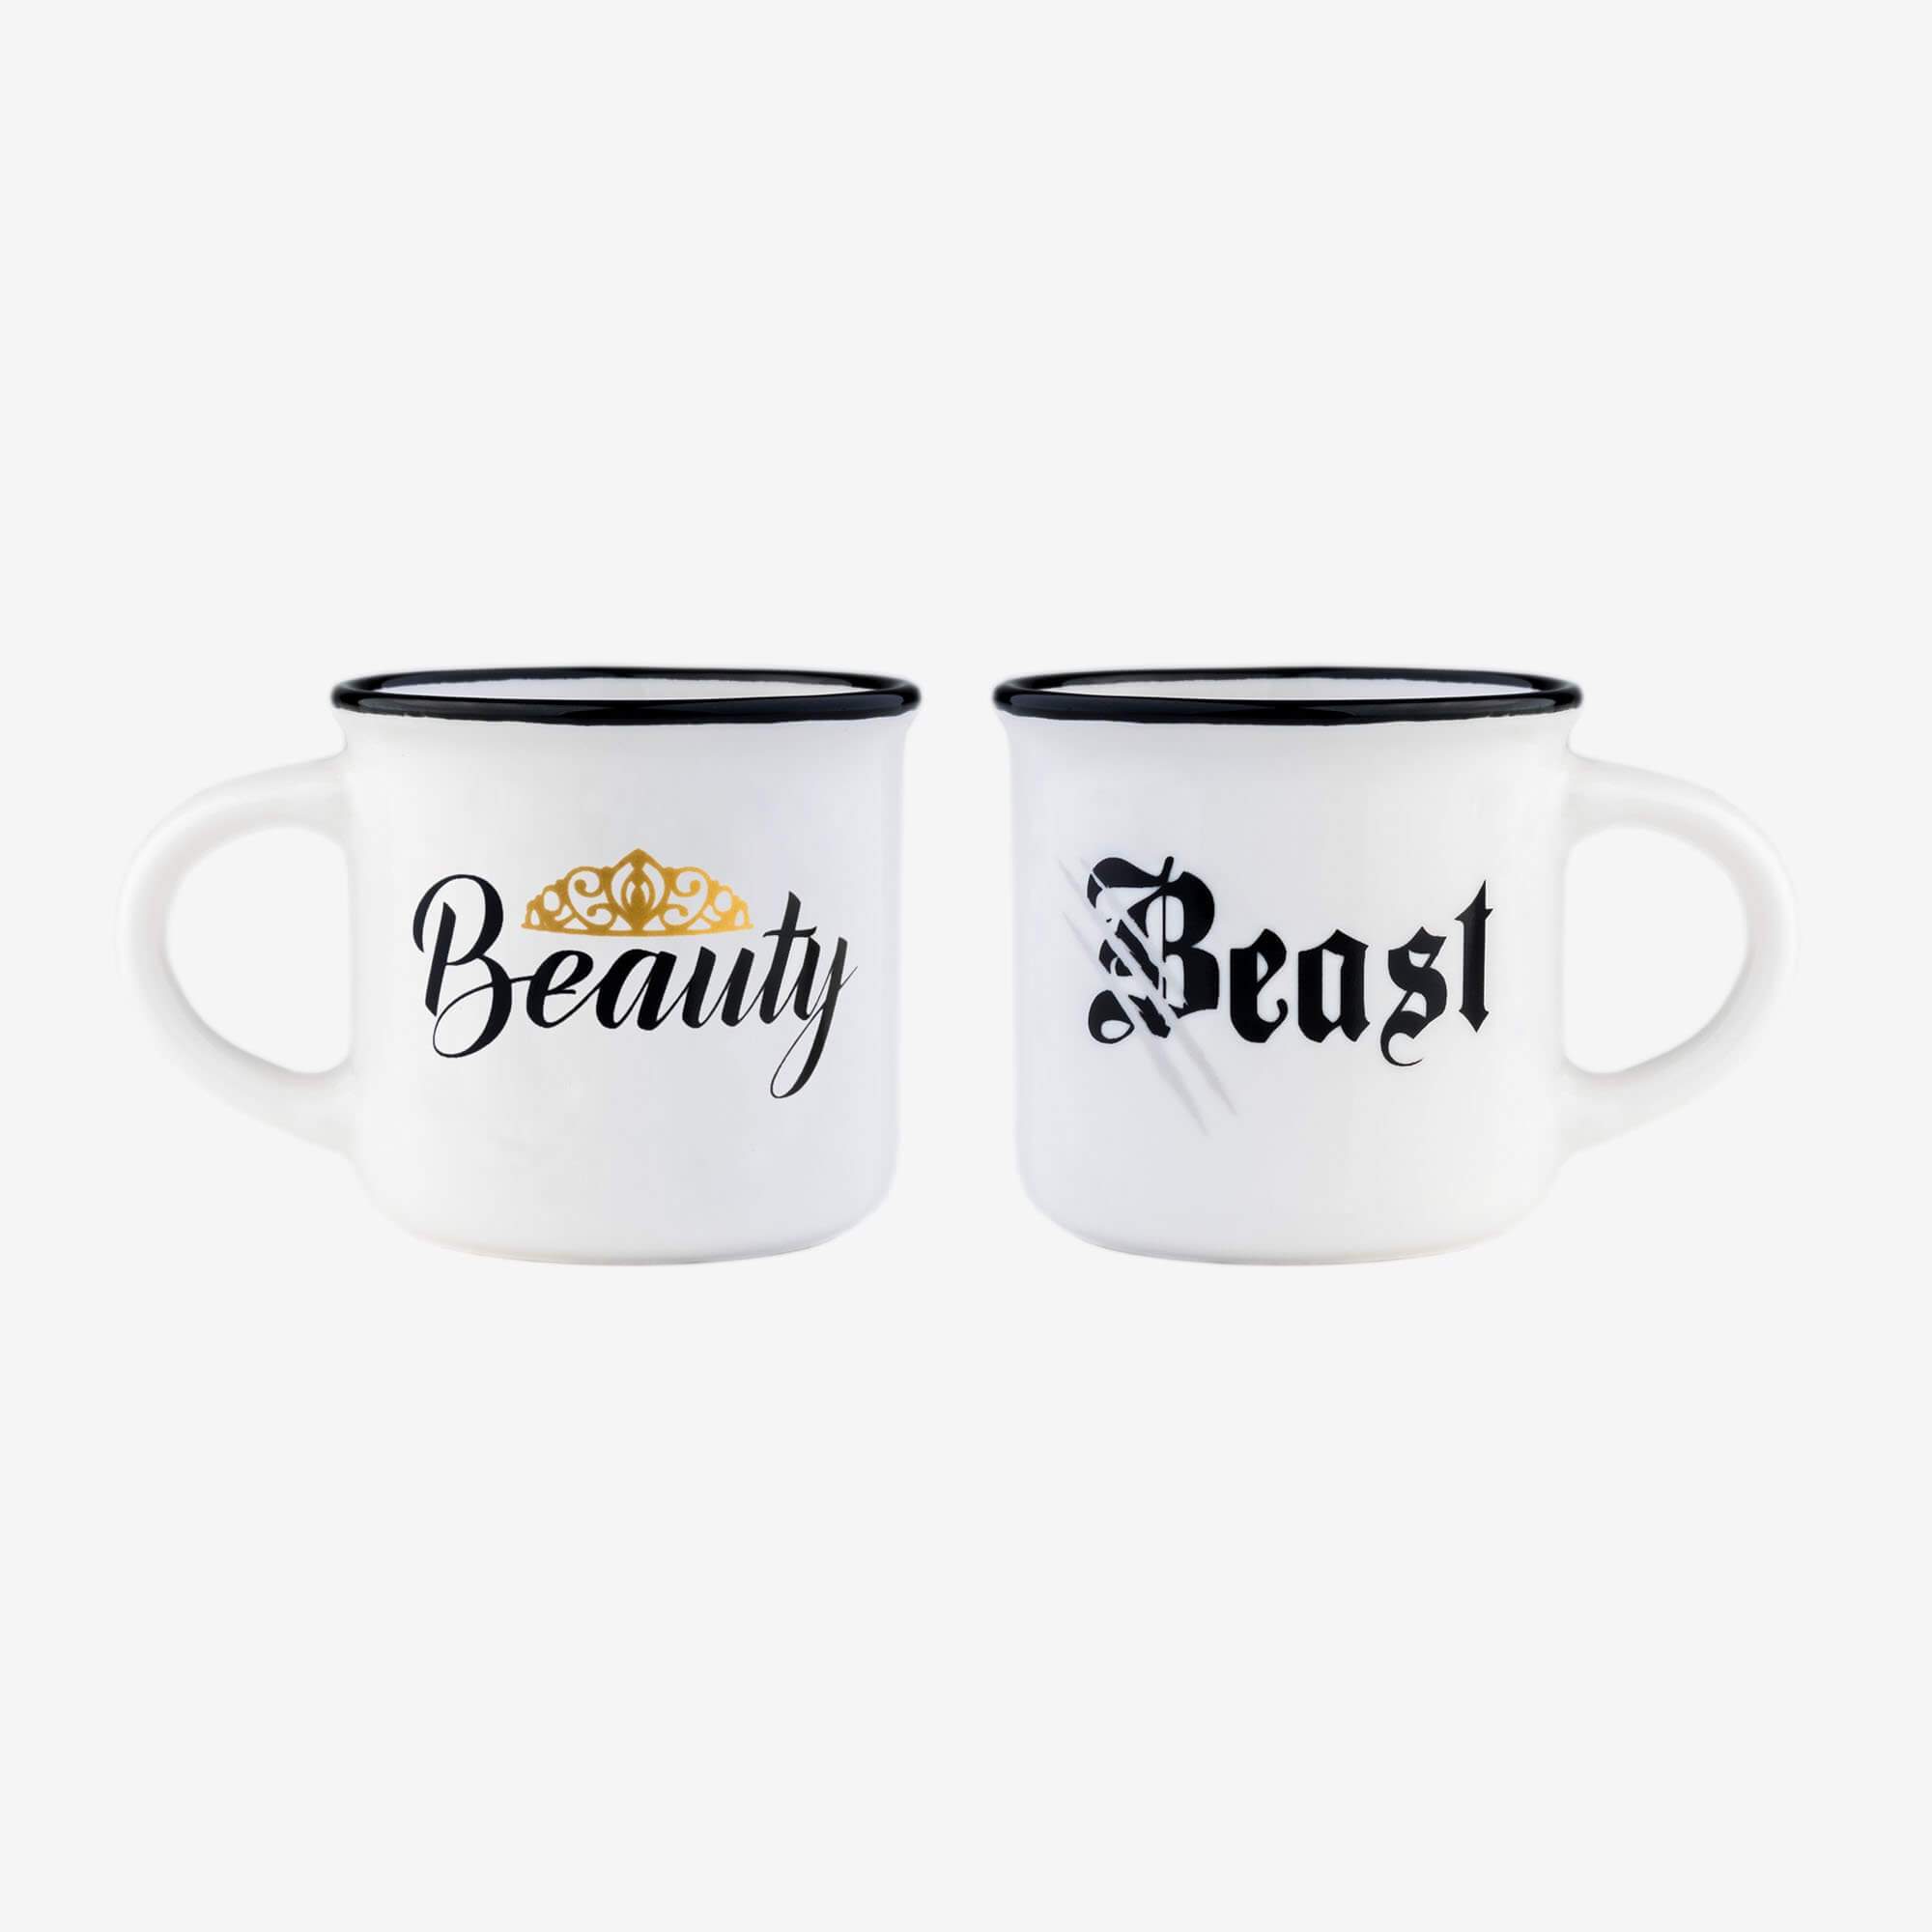 Beauty and Beast - Espresso for two Legami 